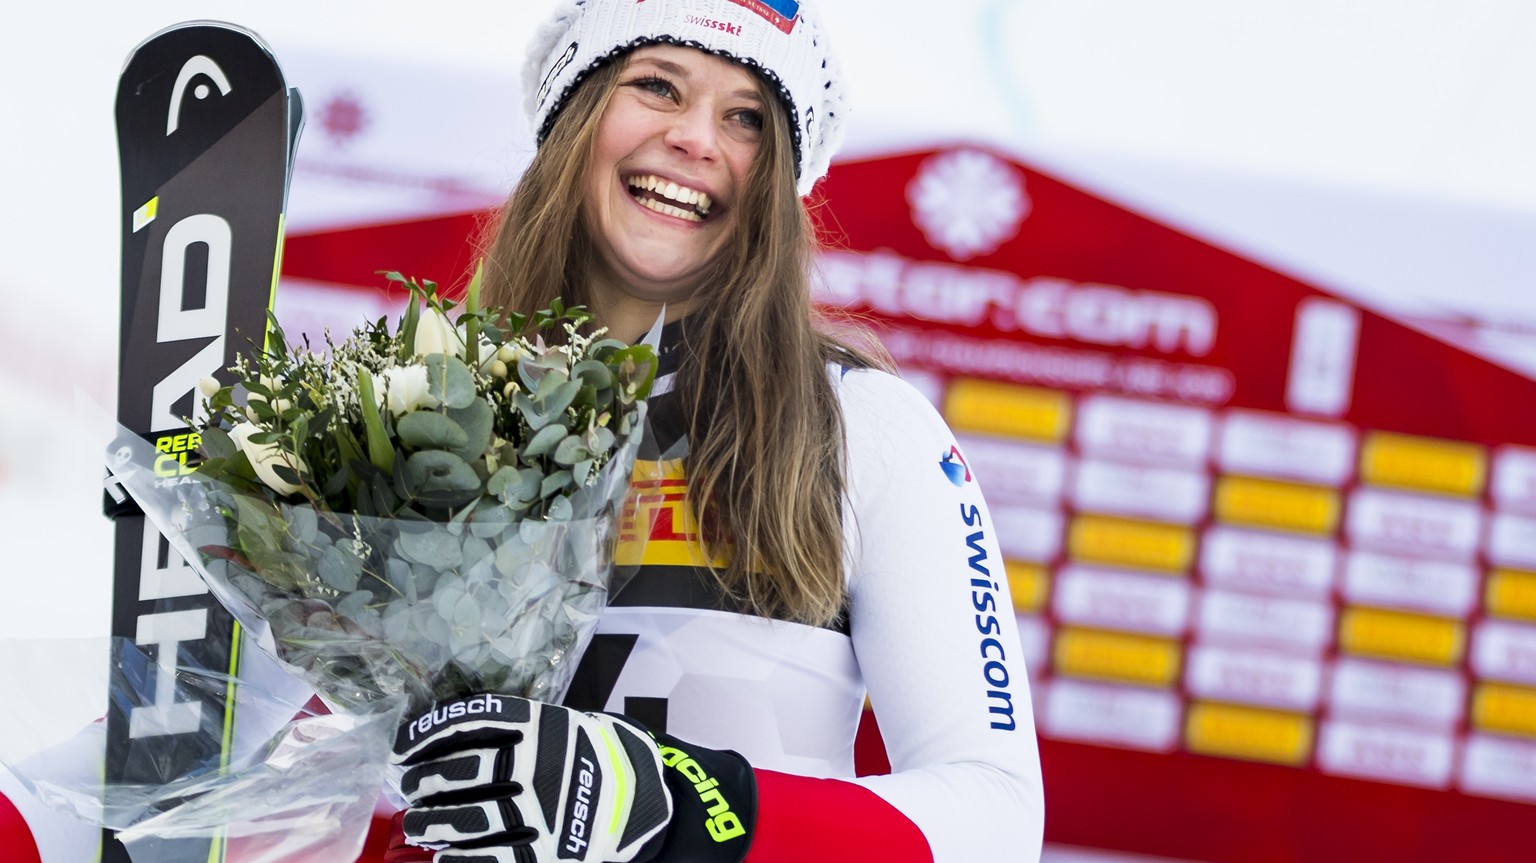 Corinne Suter of Switzerland, bronze medal, celebrates during the flowers cereemony after the women Super-G race at the 2019 FIS Alpine Skiing World Championships in Are, Sweden Tuesday, February 5, 2 ...